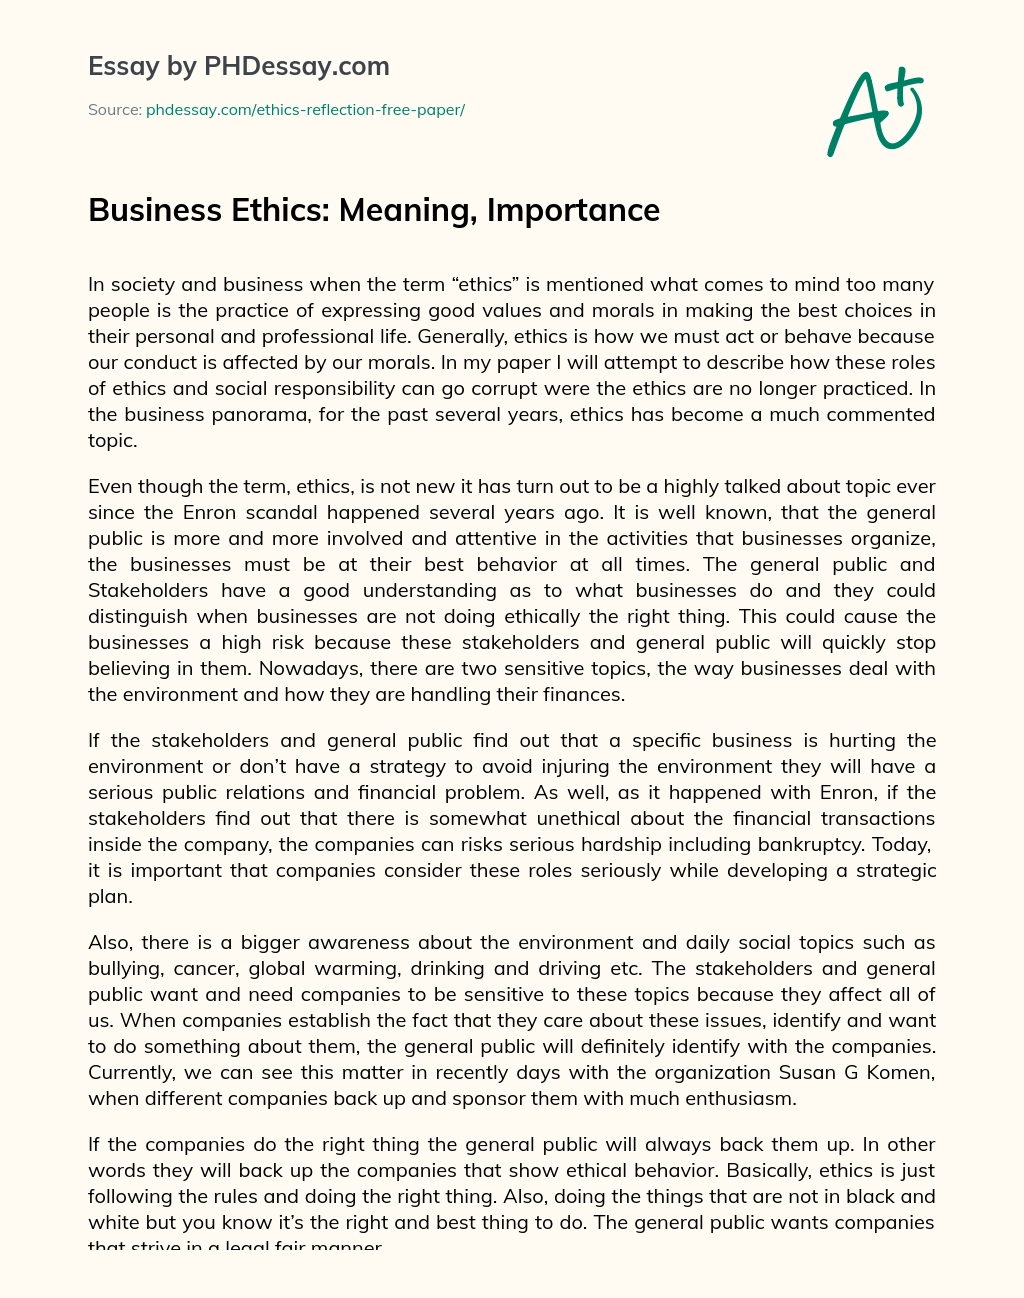 principles of business ethics essay